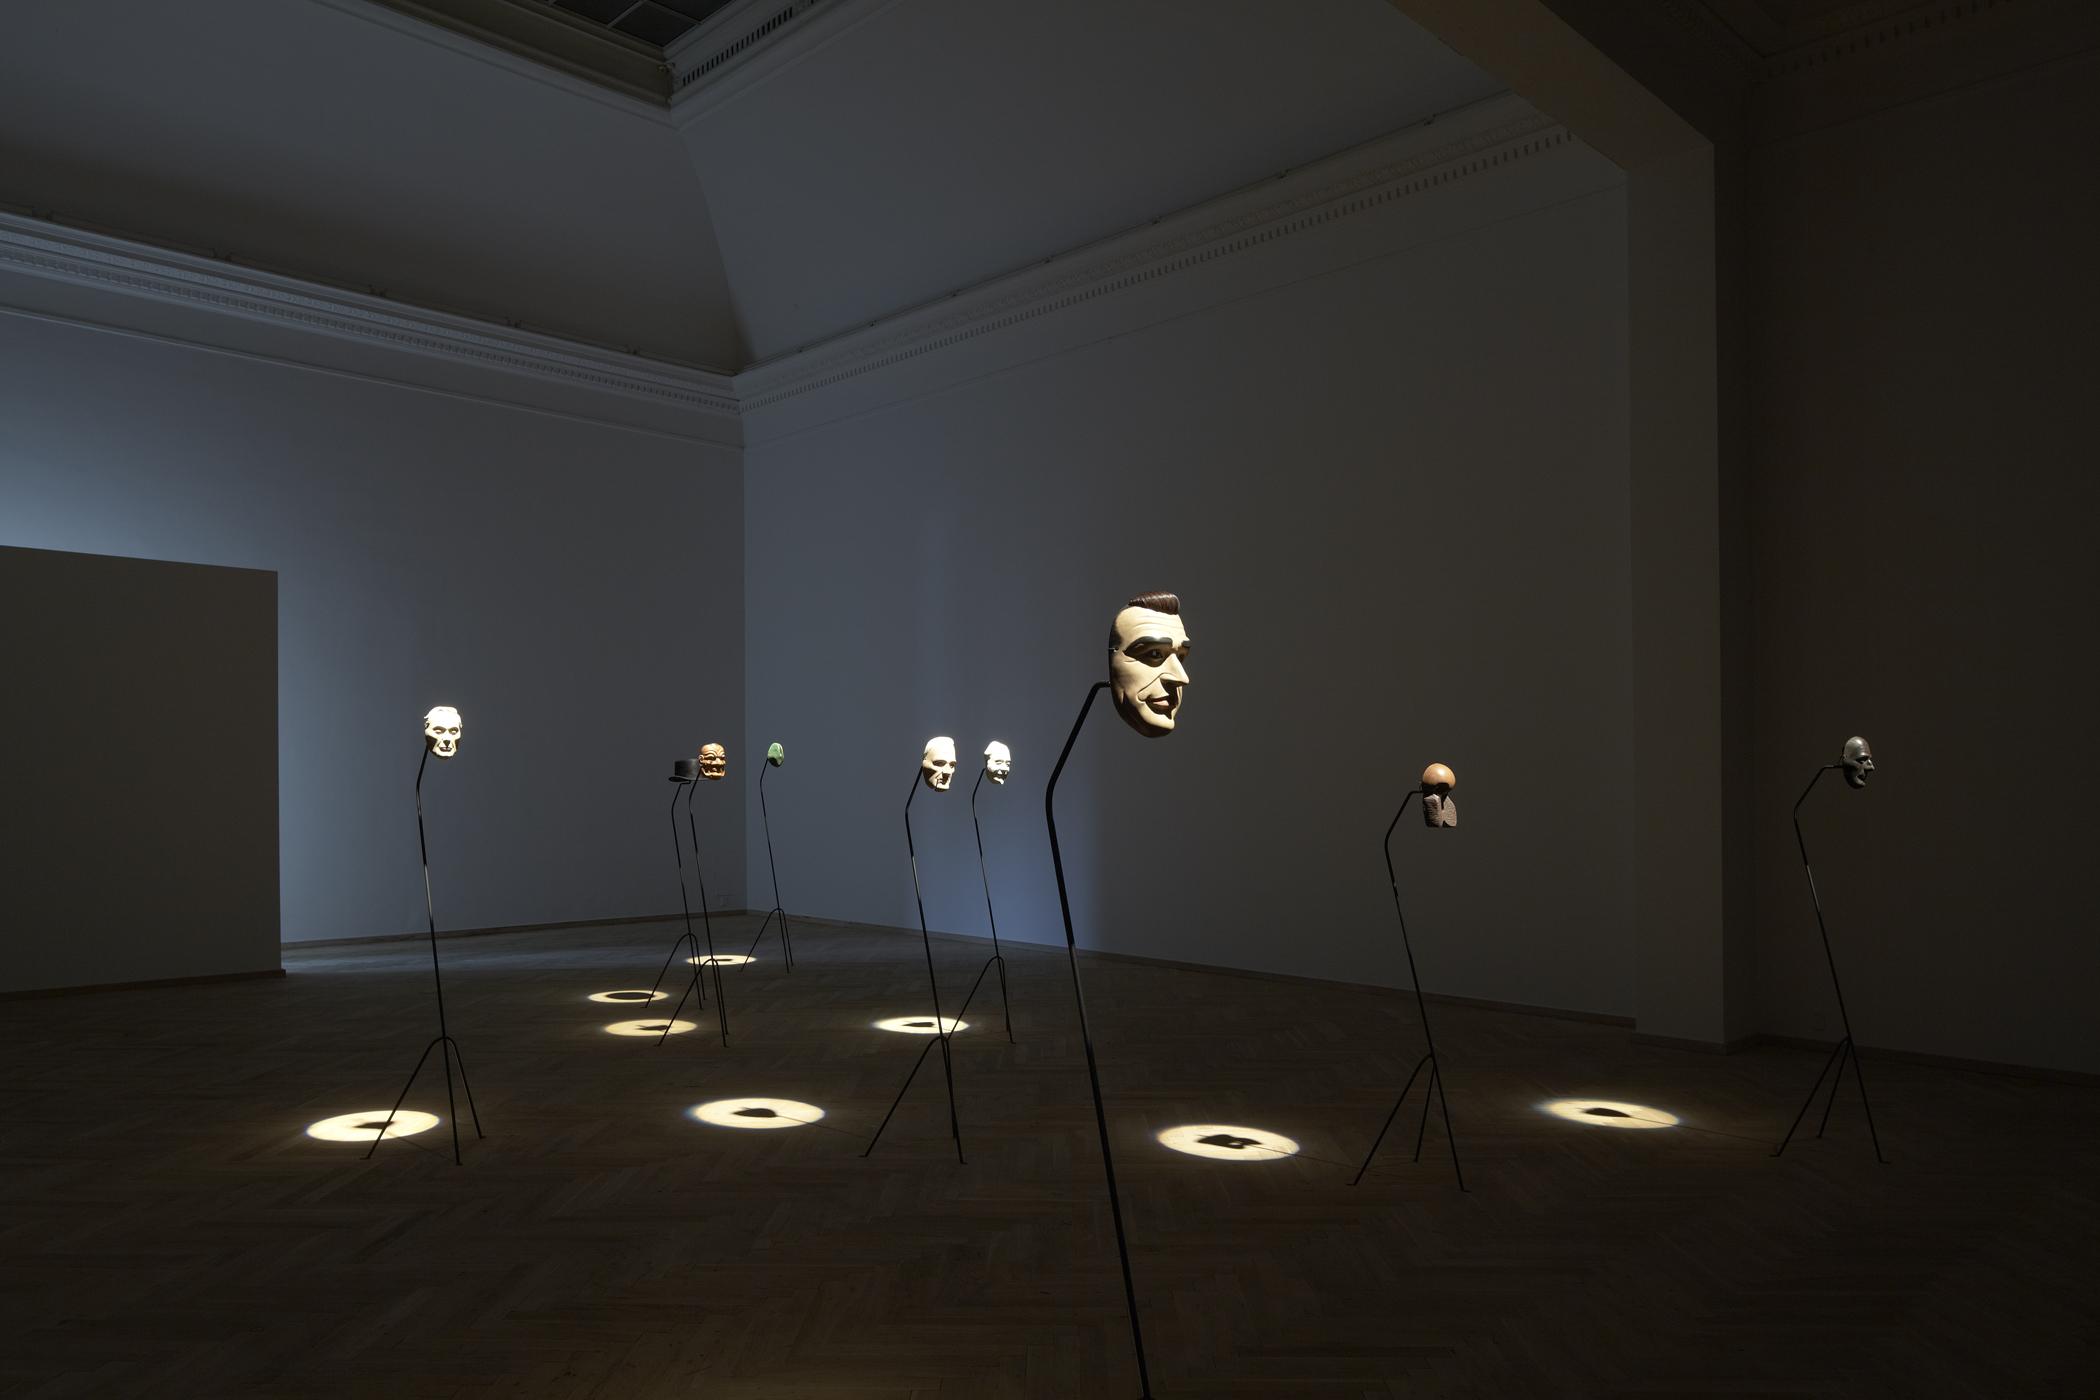 Installation view of a dark room with nine human-face masks illuminated by spotlights